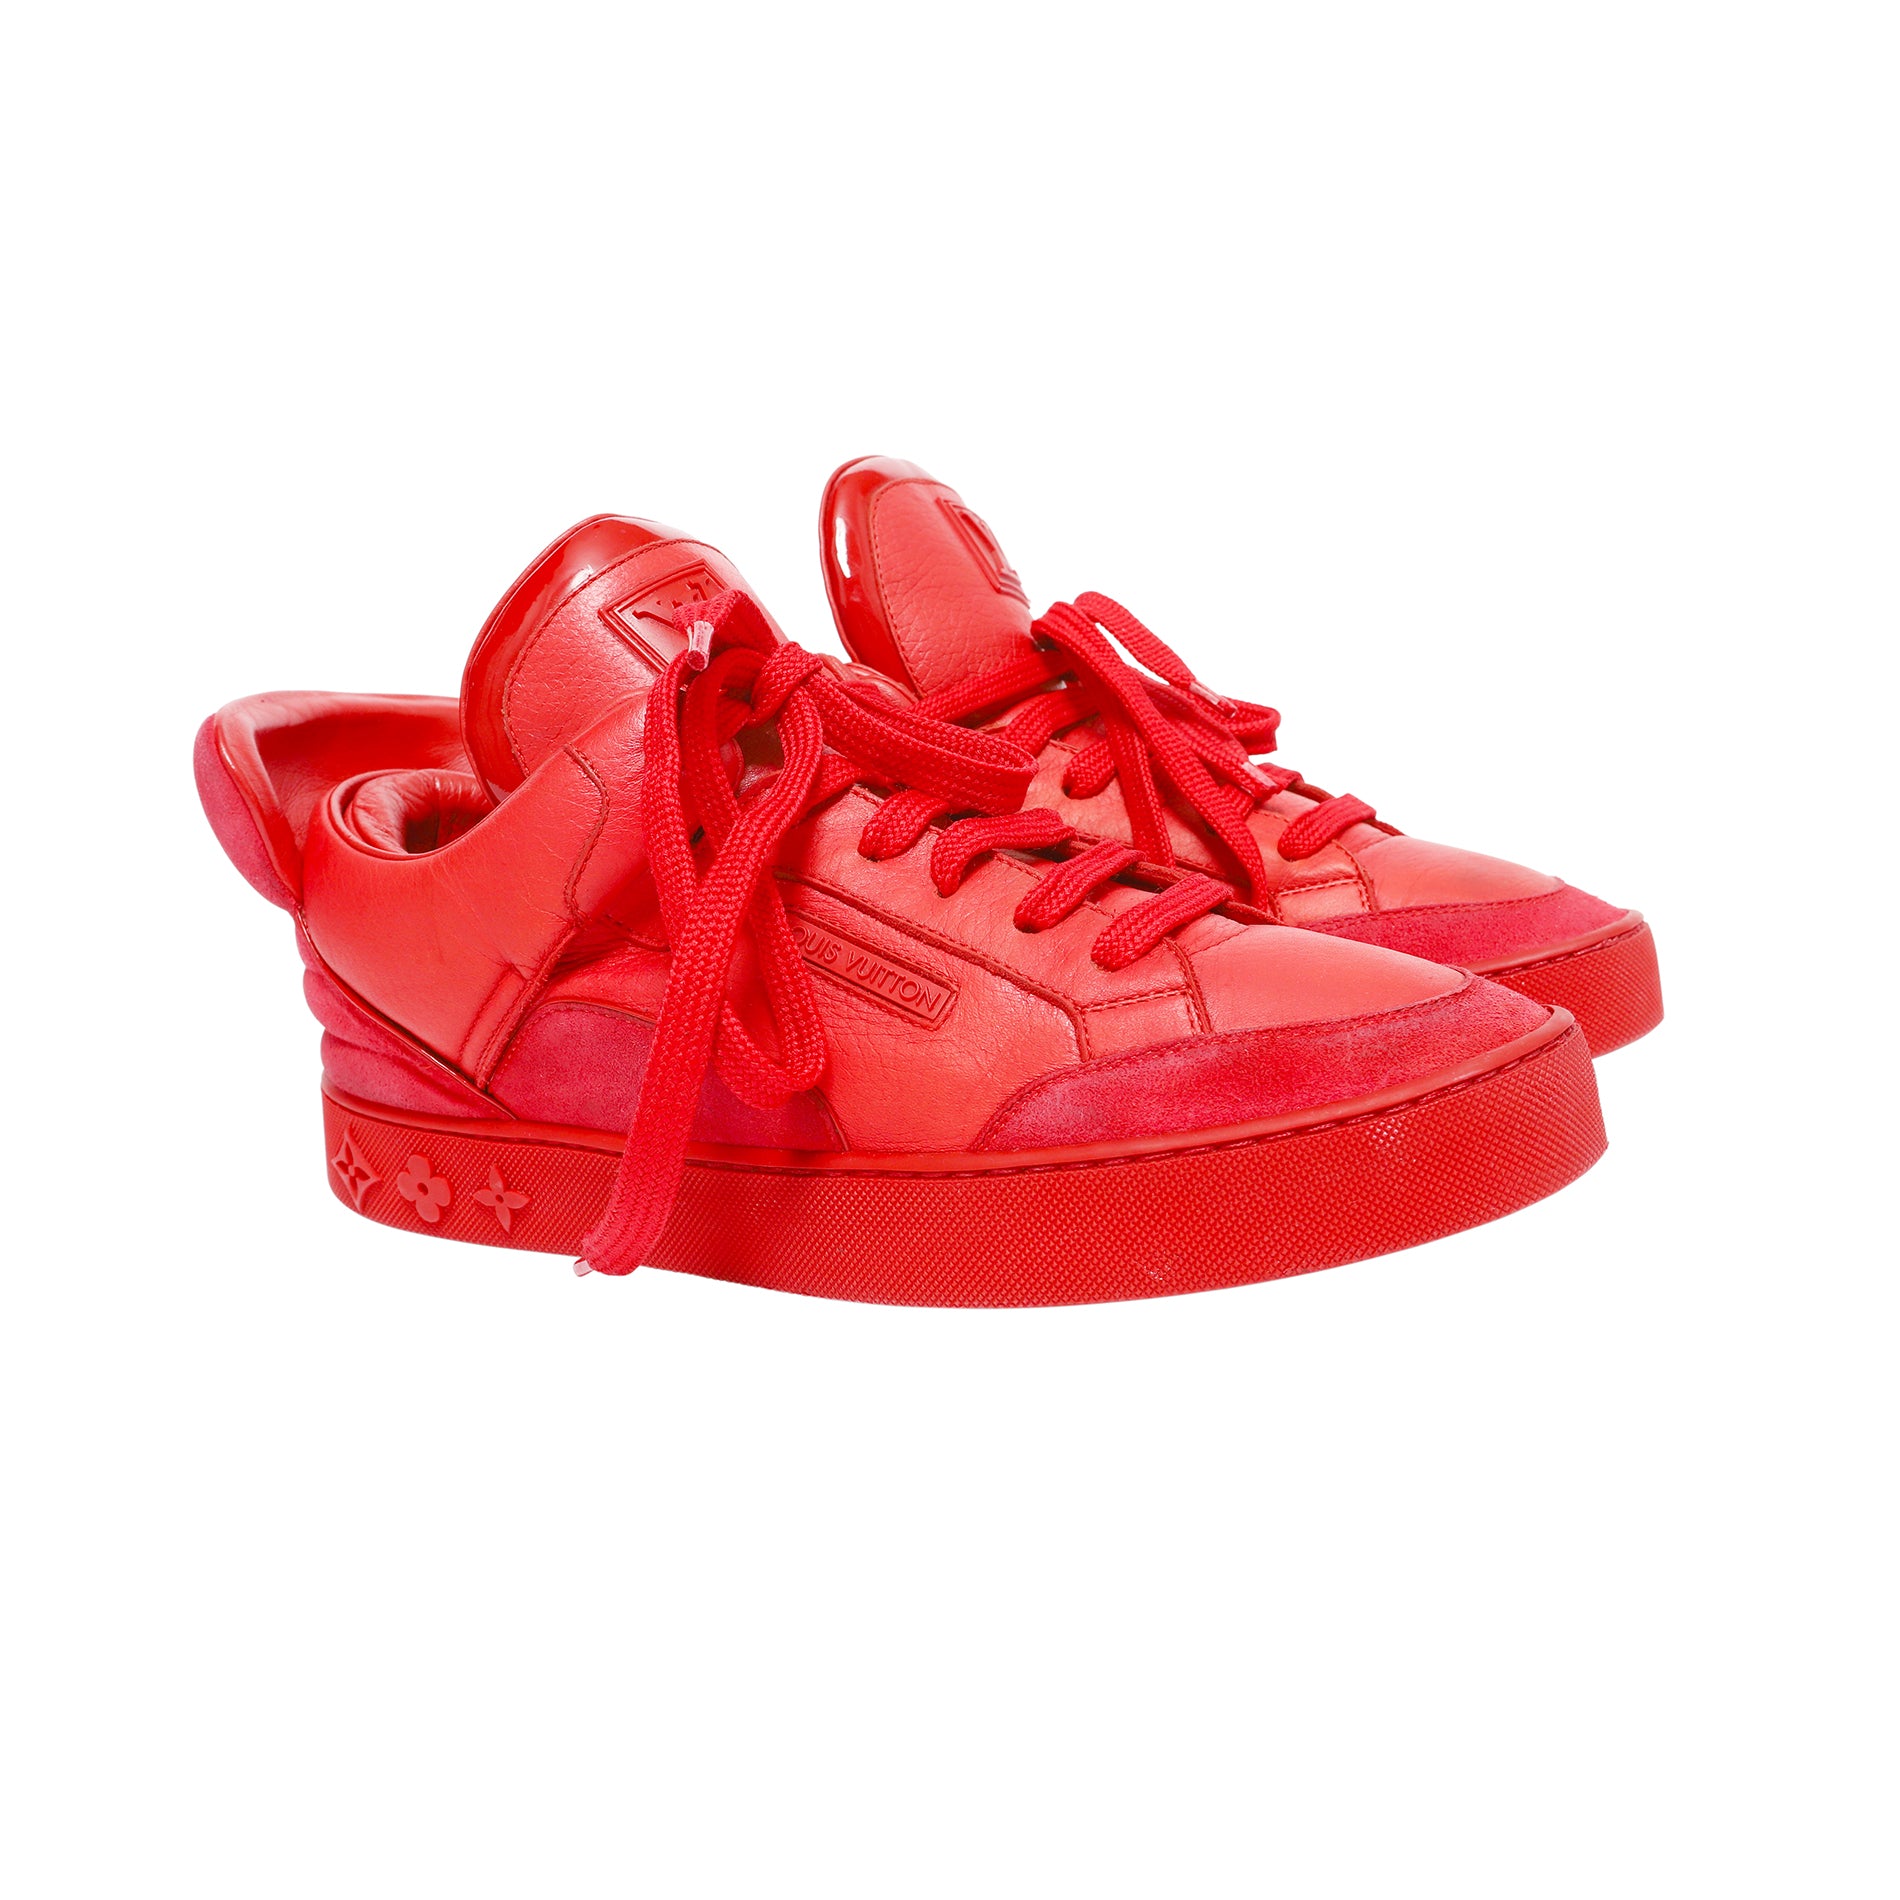 Louis Vuitton x Kanye West Red Leather and Suede Don High Top